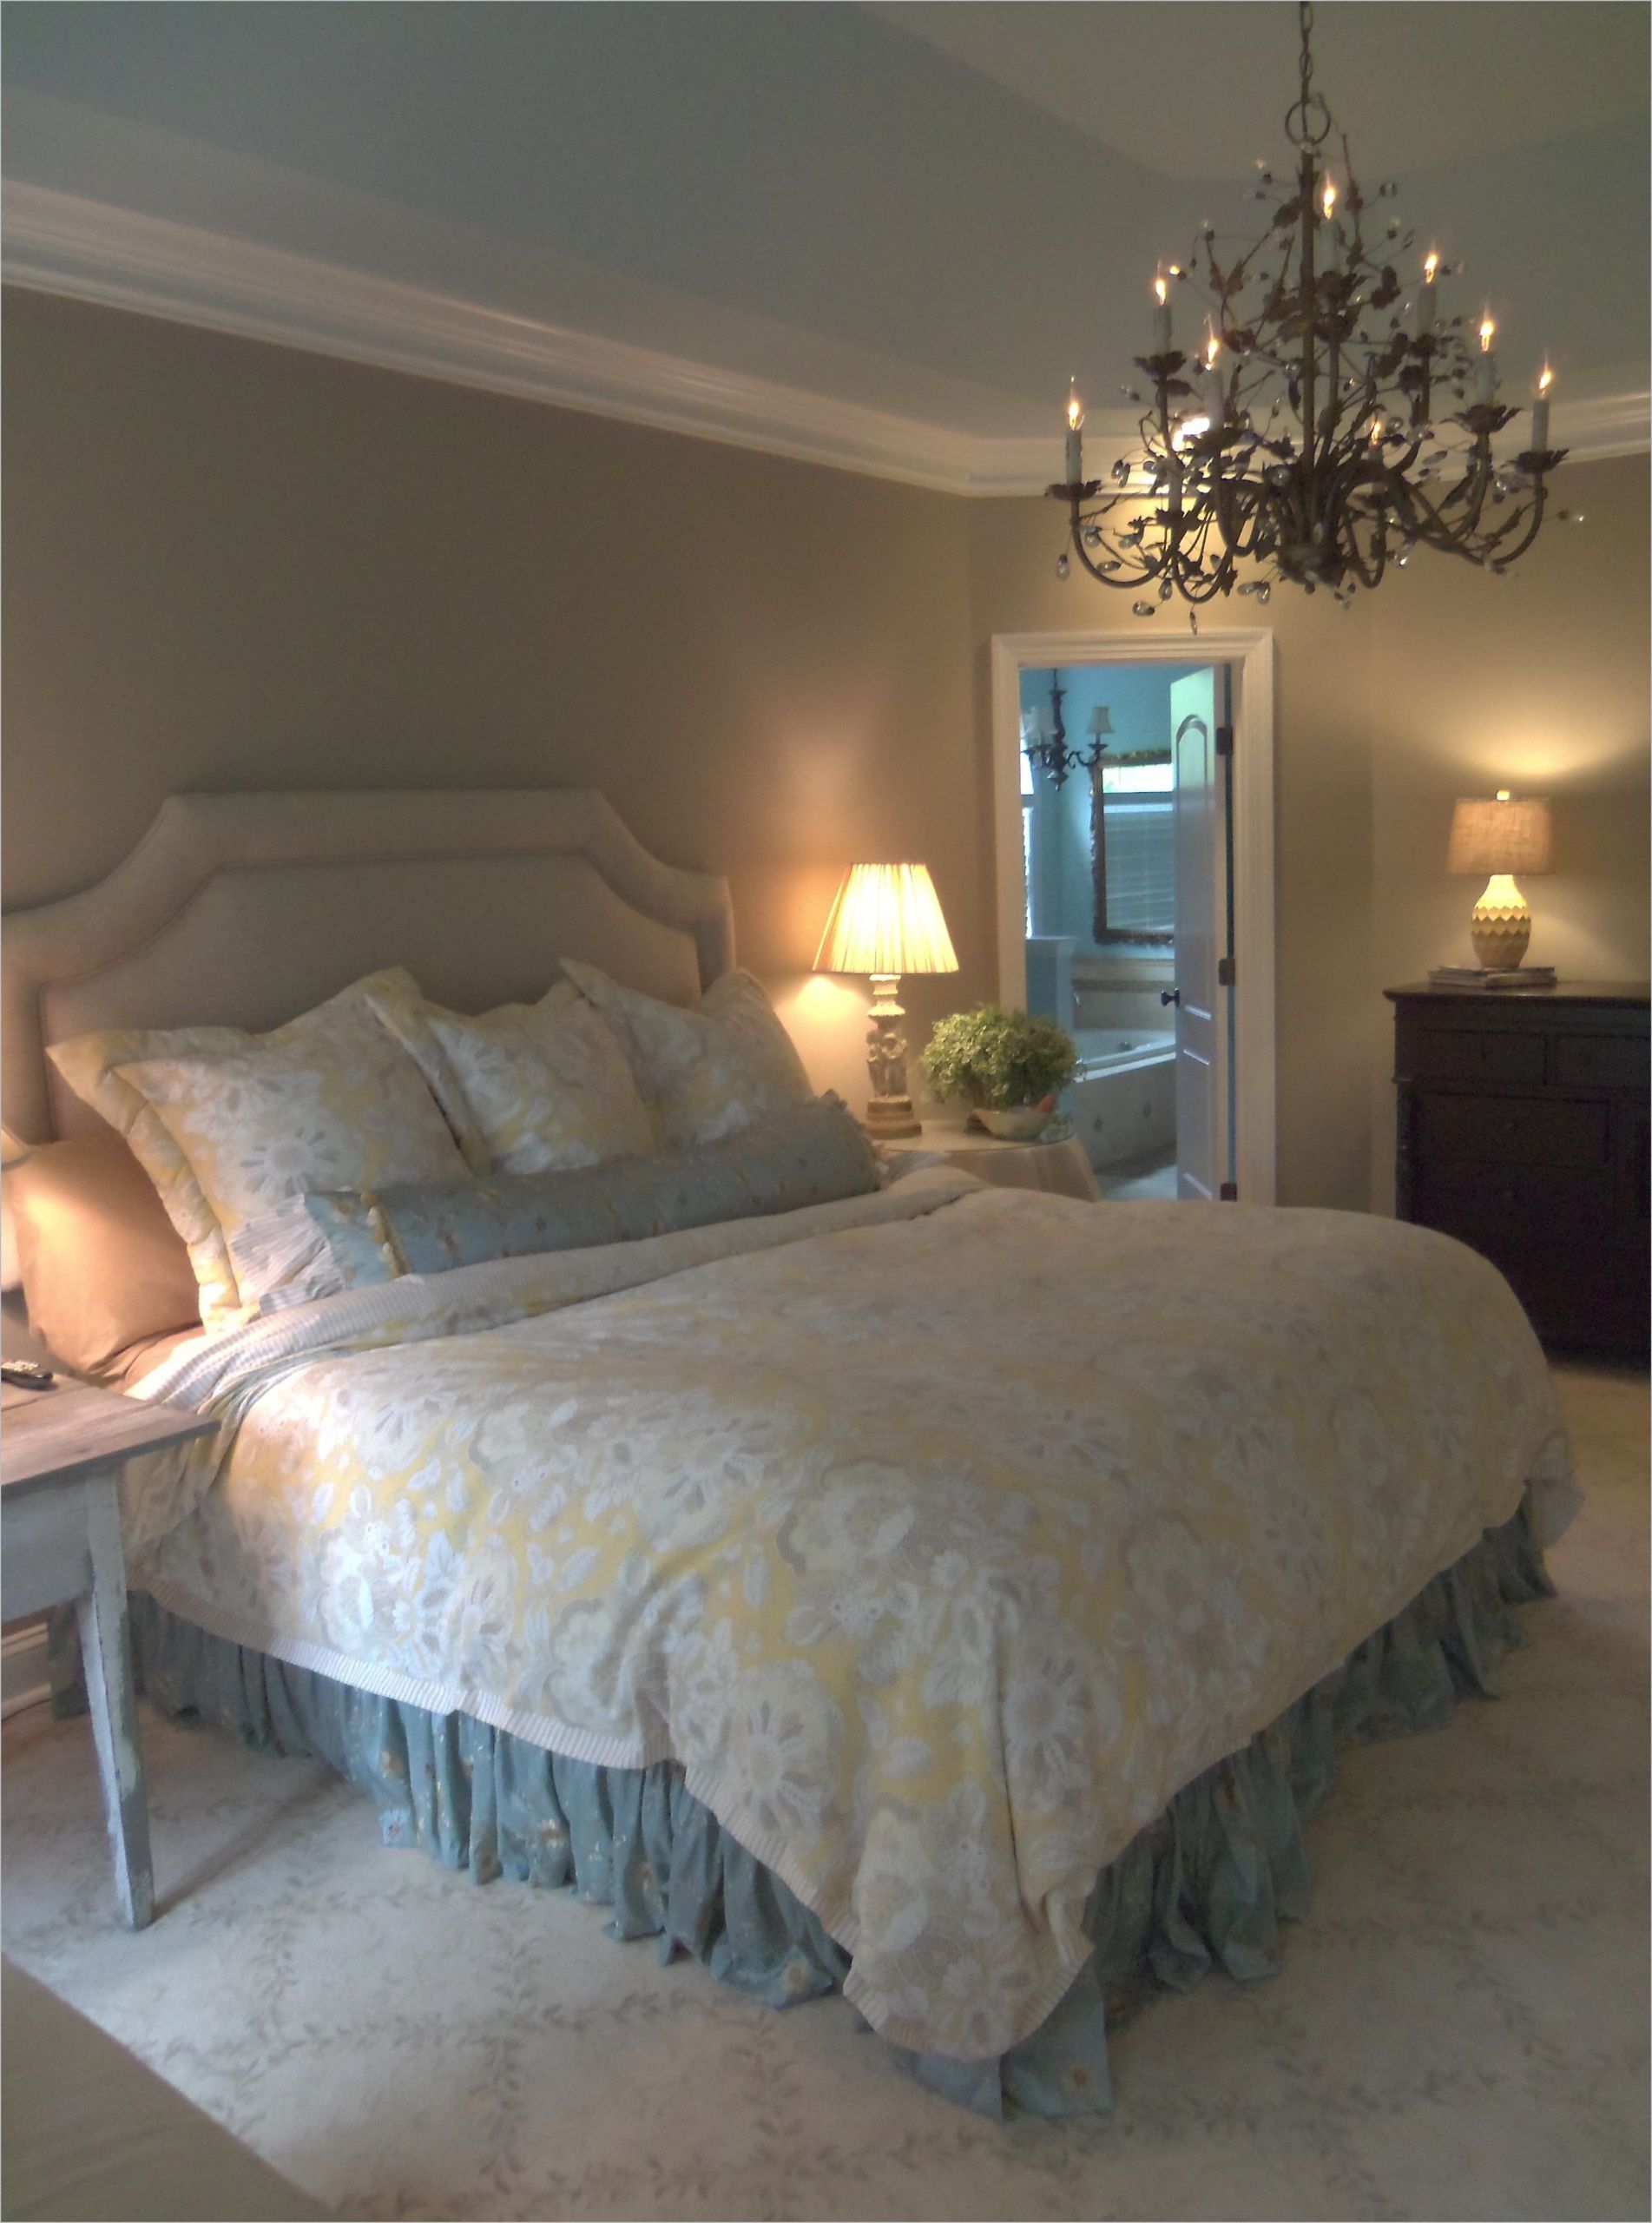 French Shabby Chic Bedroom Ideas
 french shabby chic master bedroom design with photos linen